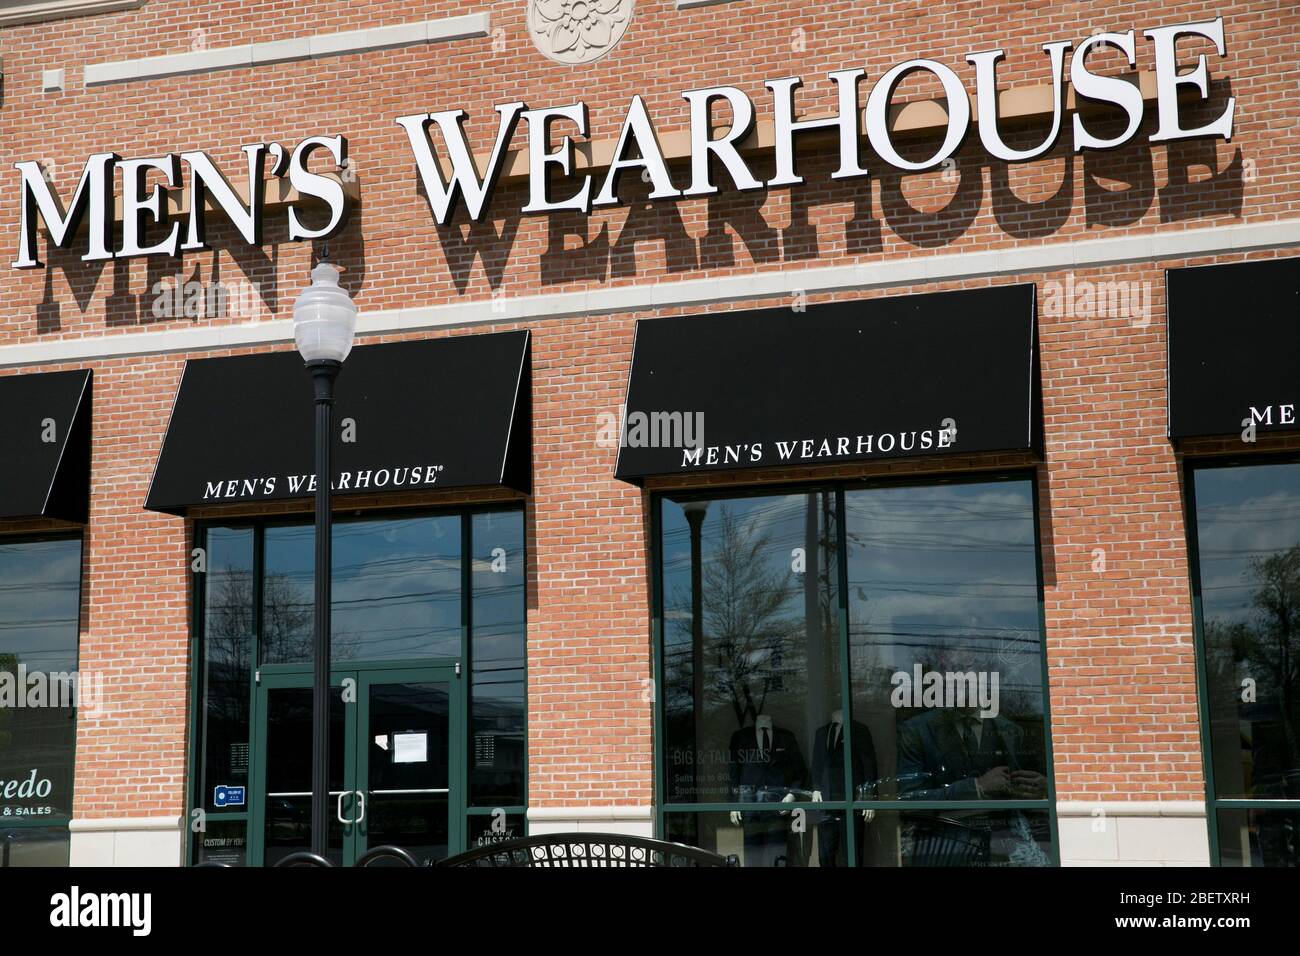 A logo sign outside of a Men's Wearhouse retail store location in Cherry Hill, New Jersey on April 11, 2020. Stock Photo